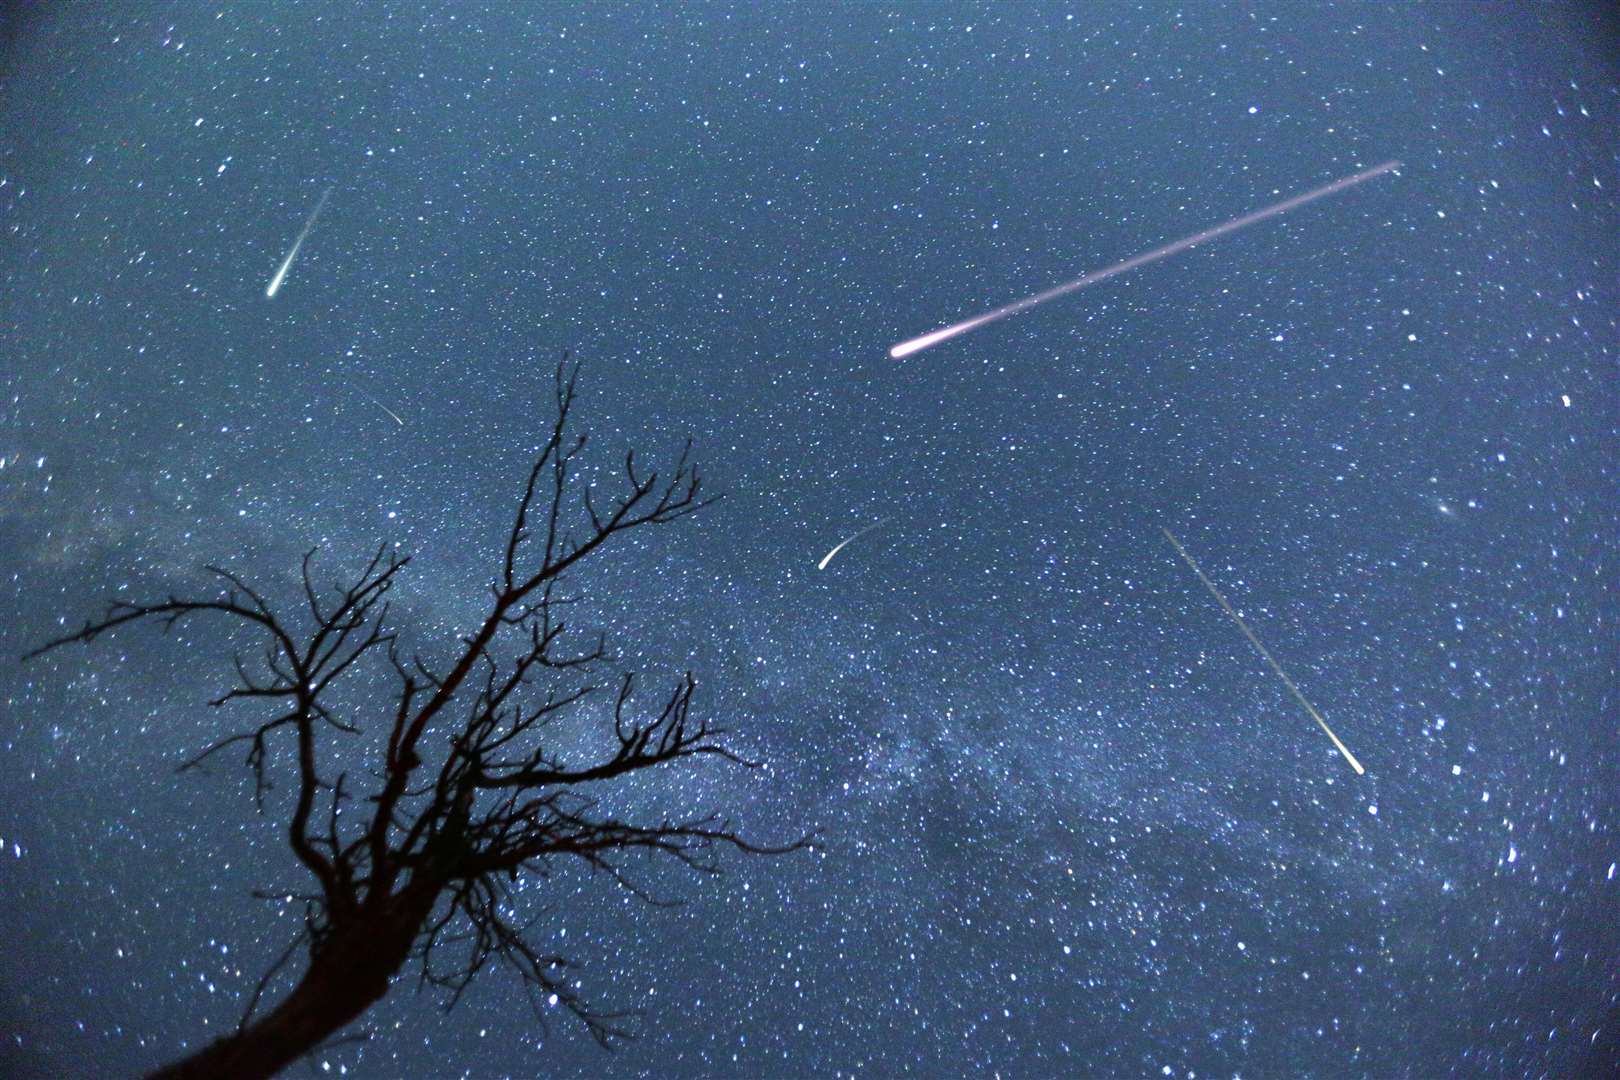 The peak could see 50 meteors an hour zoom across our skies Picture: Minko Chernev, Cyclonphoto